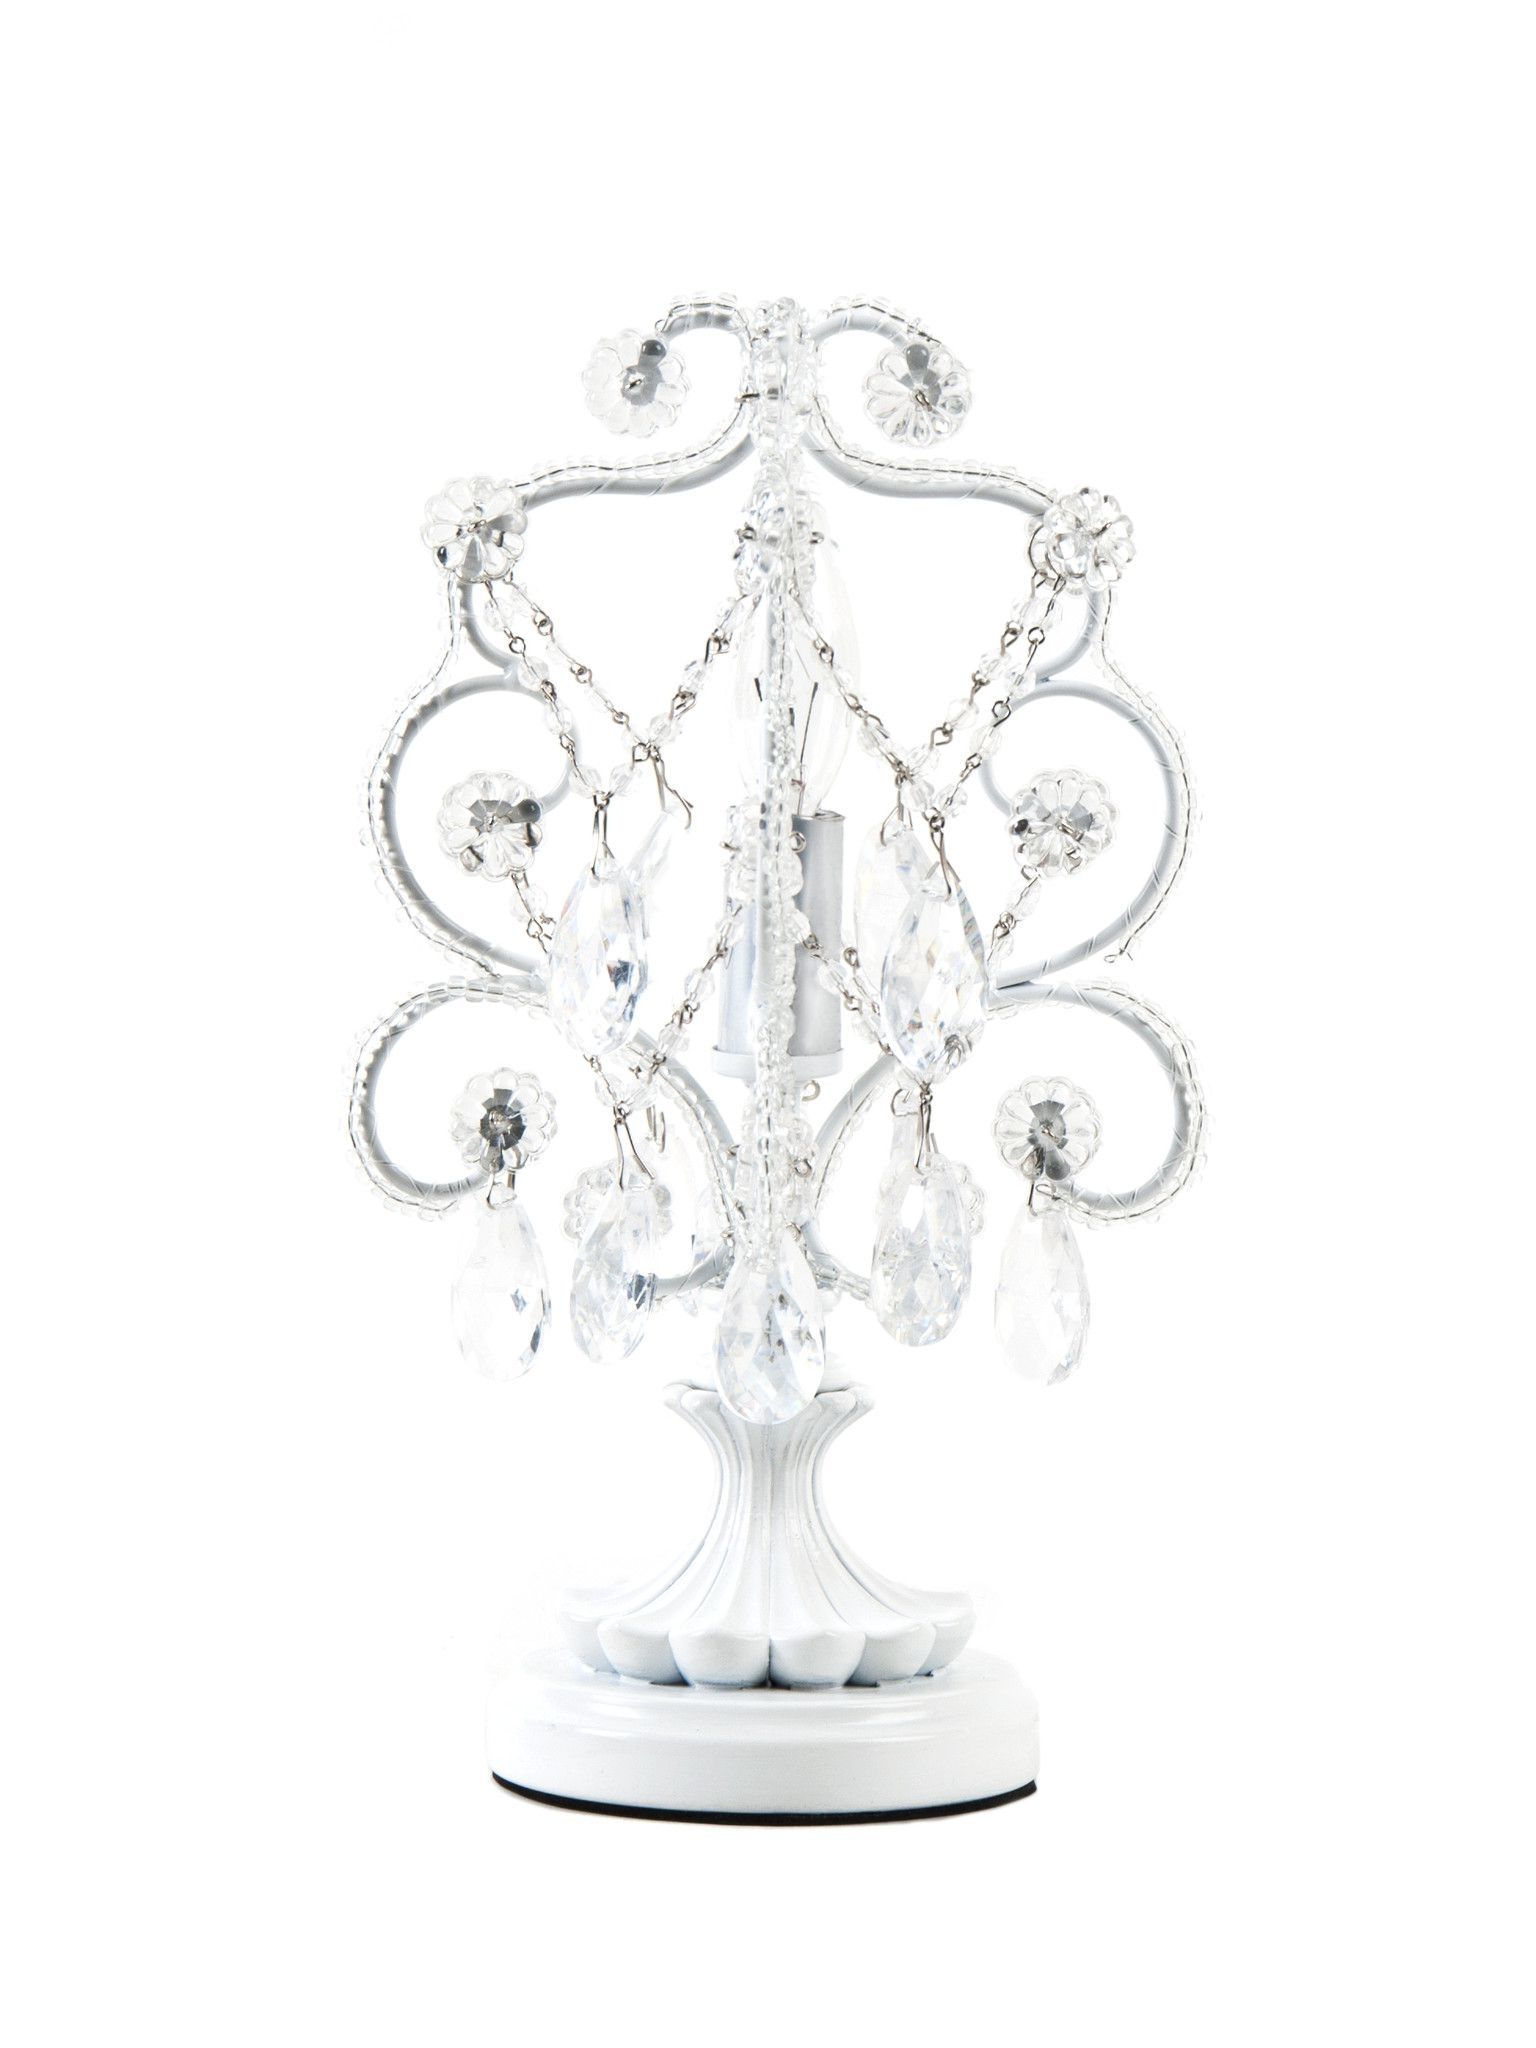 Chandelier Table Lamp, Mini Chandelier Within Famous Mini Chandelier Table Lamps (View 12 of 15)